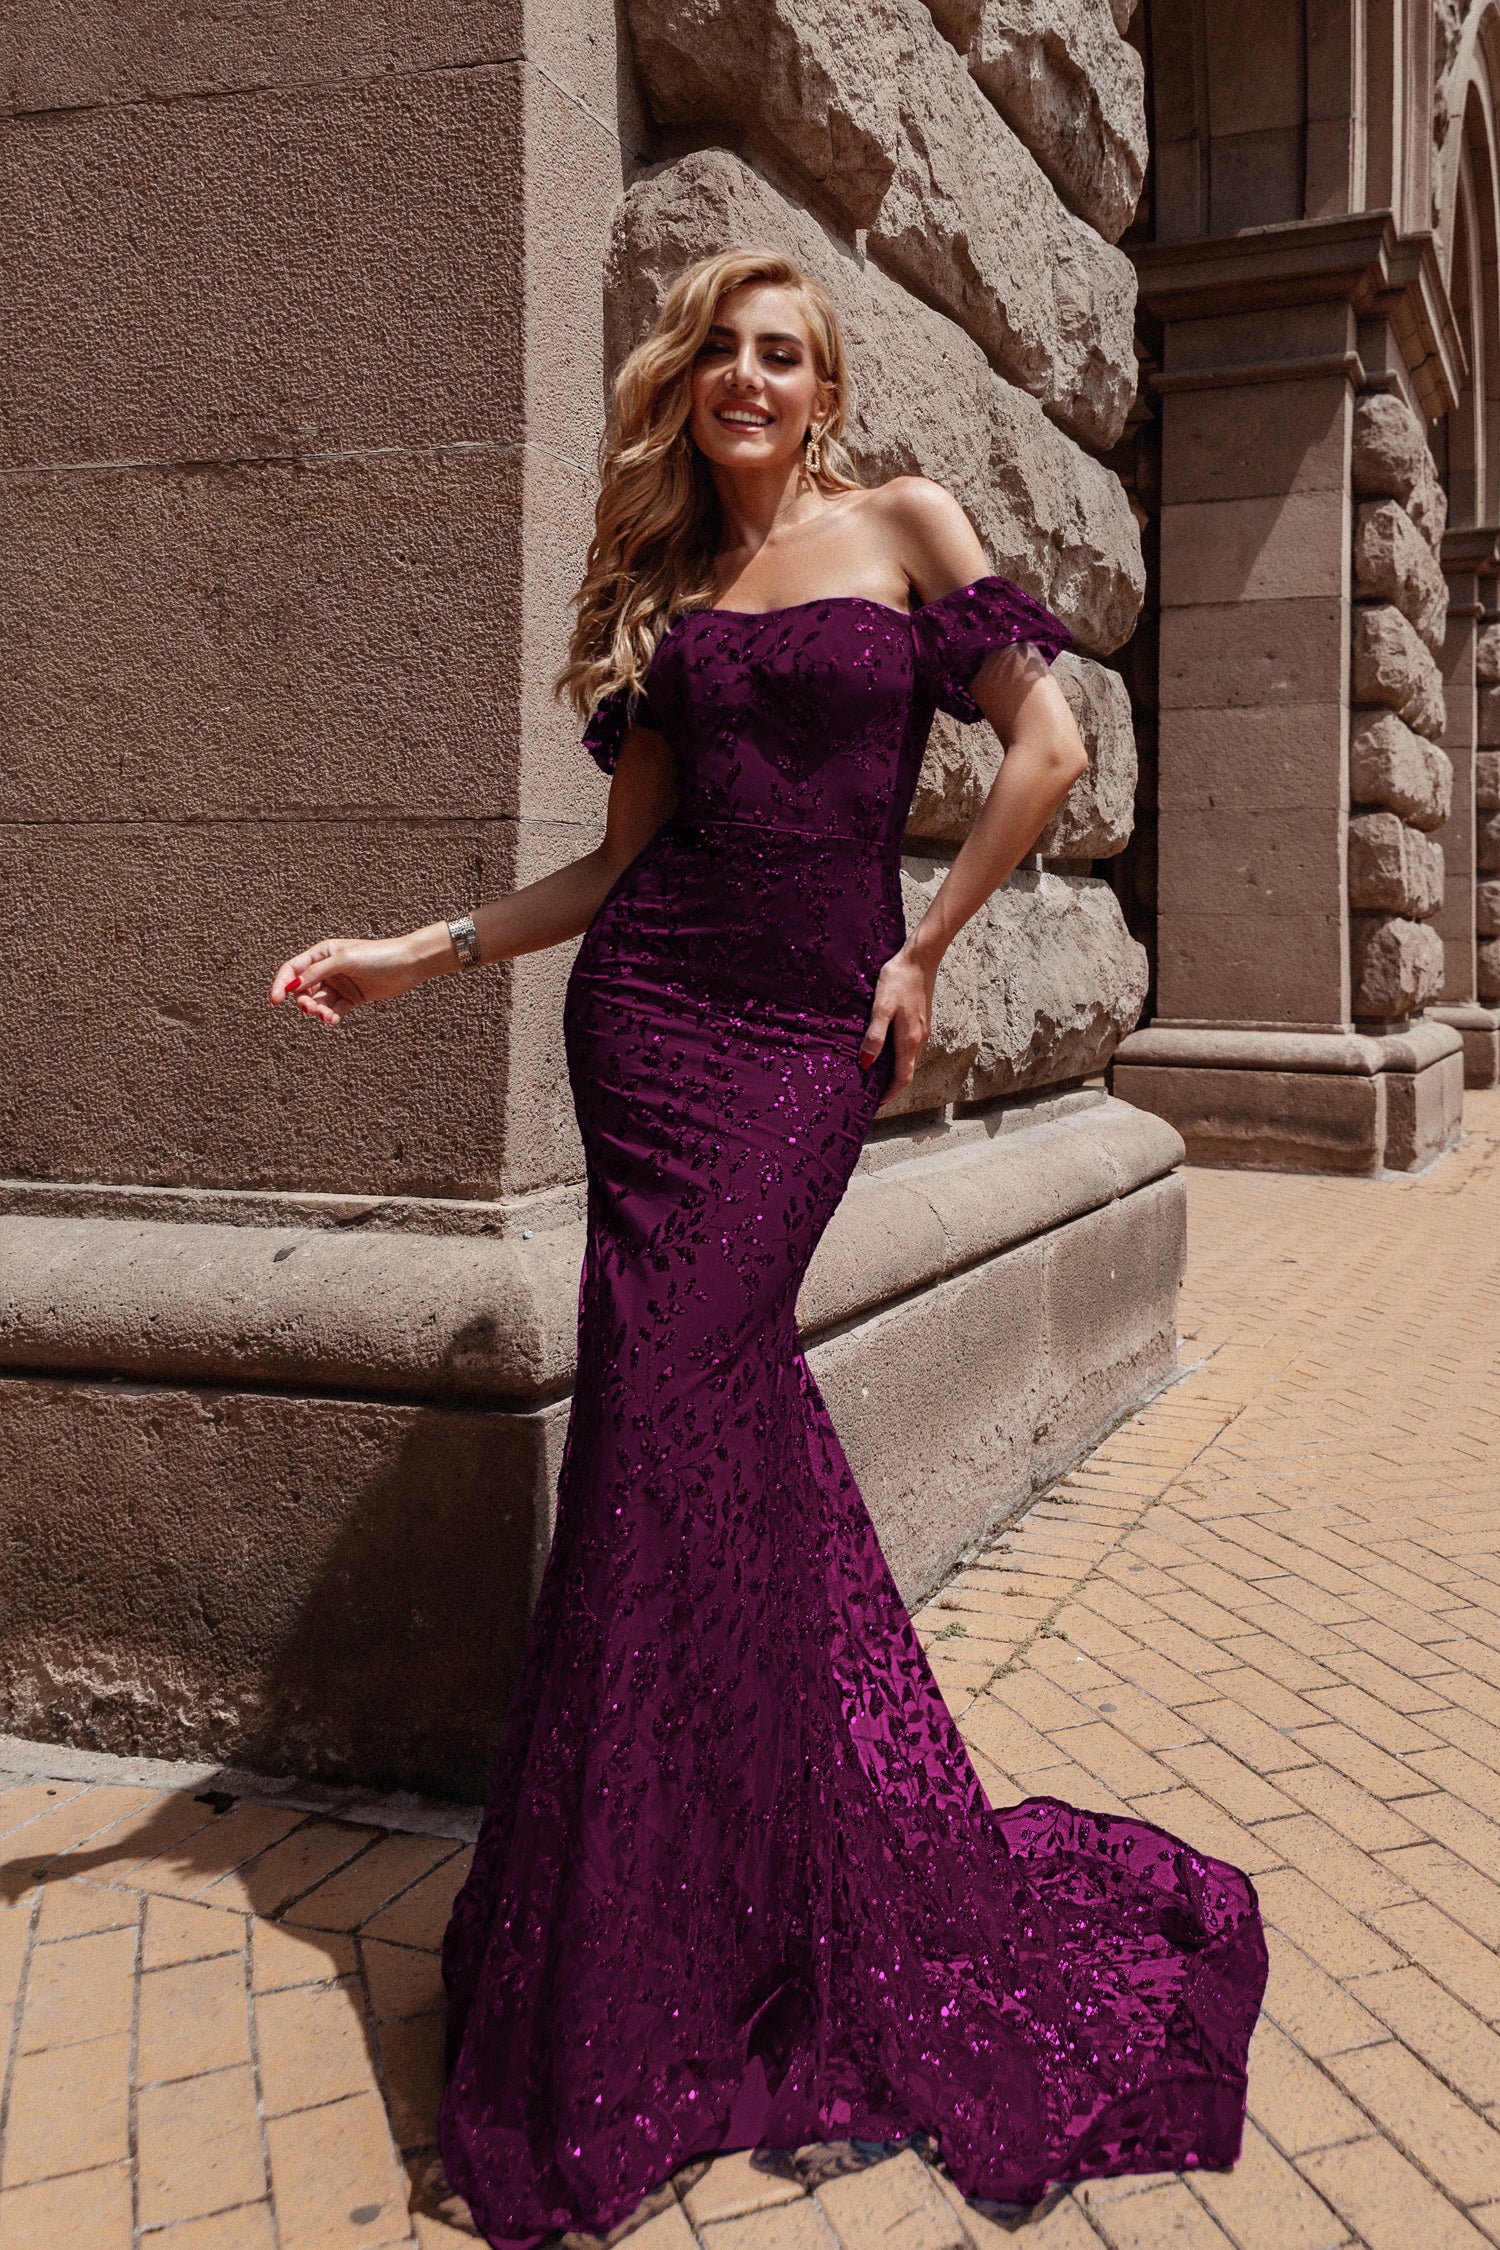 Fuchsia & Purple Hand Embroidered Gown